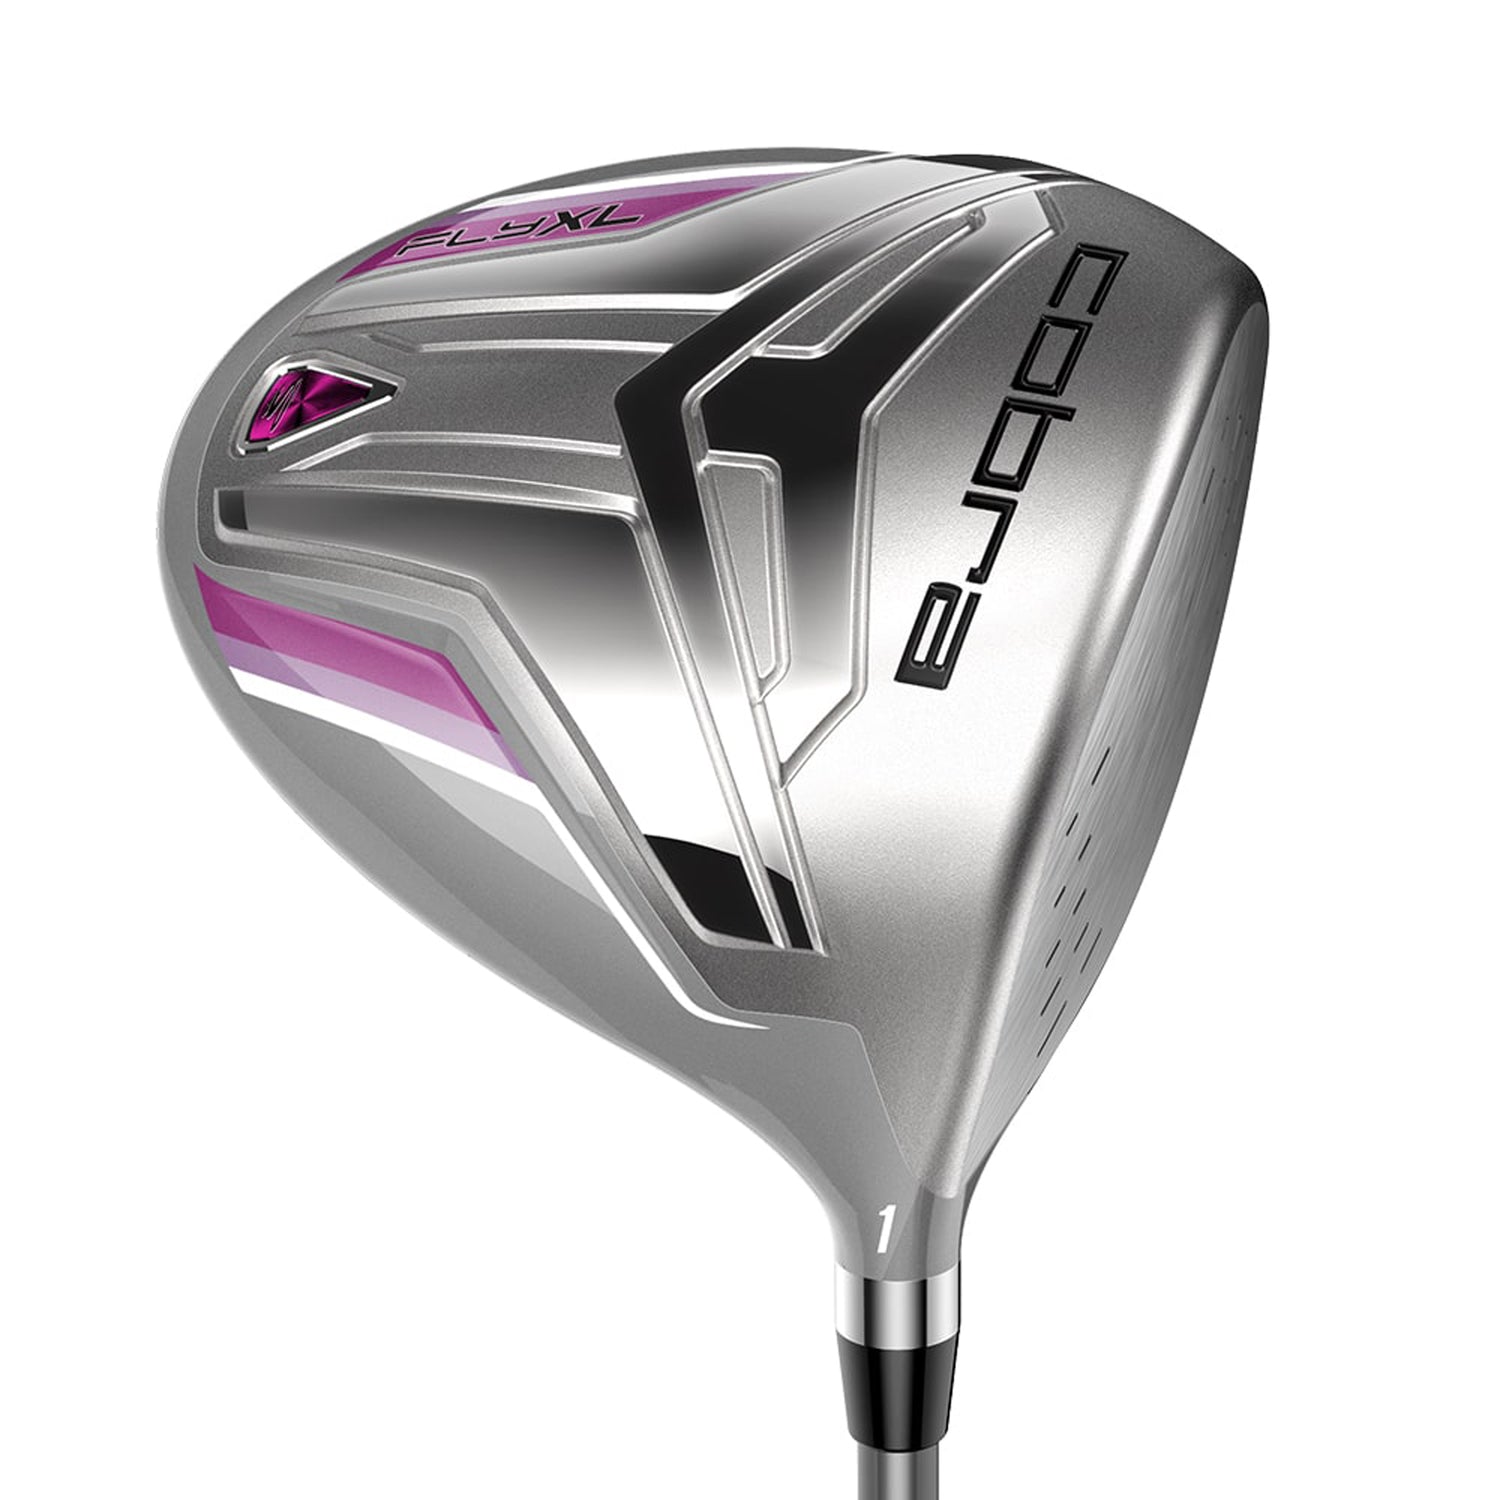 Ladies' Pink Golf Club Set for Petite Ladies (Height 5' to 5'3), Right  Handed, Includes: Driver, Wood, Hybrid, No. 6,7,8,9, PW Irons, Graphite  Shafts